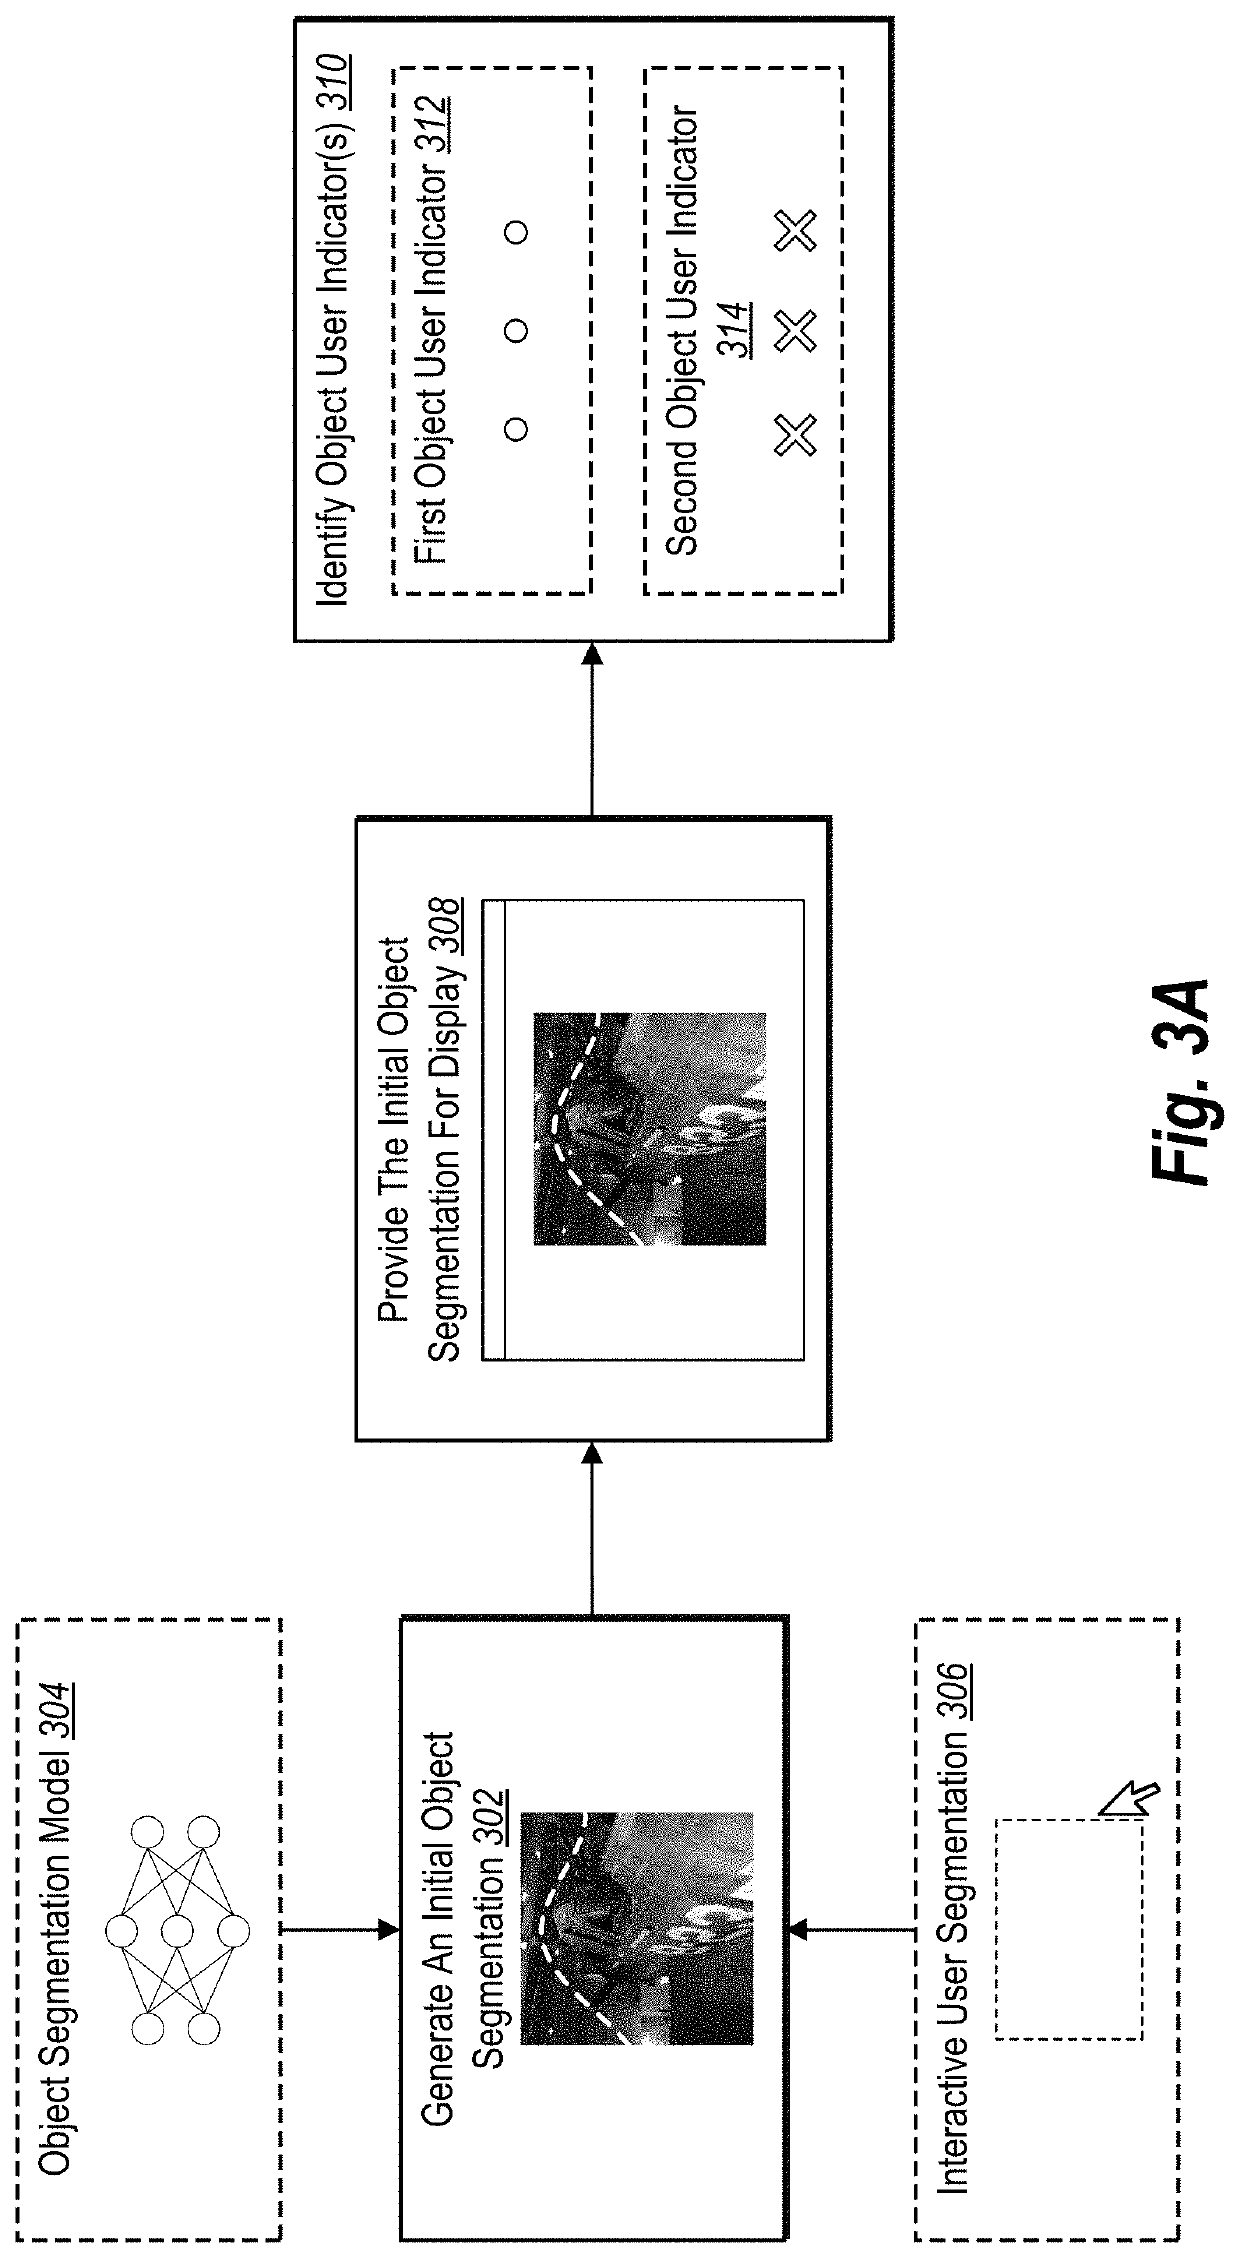 Utilizing a segmentation neural network to process initial object segmentations and object user indicators within a digital image to generate improved object segmentations